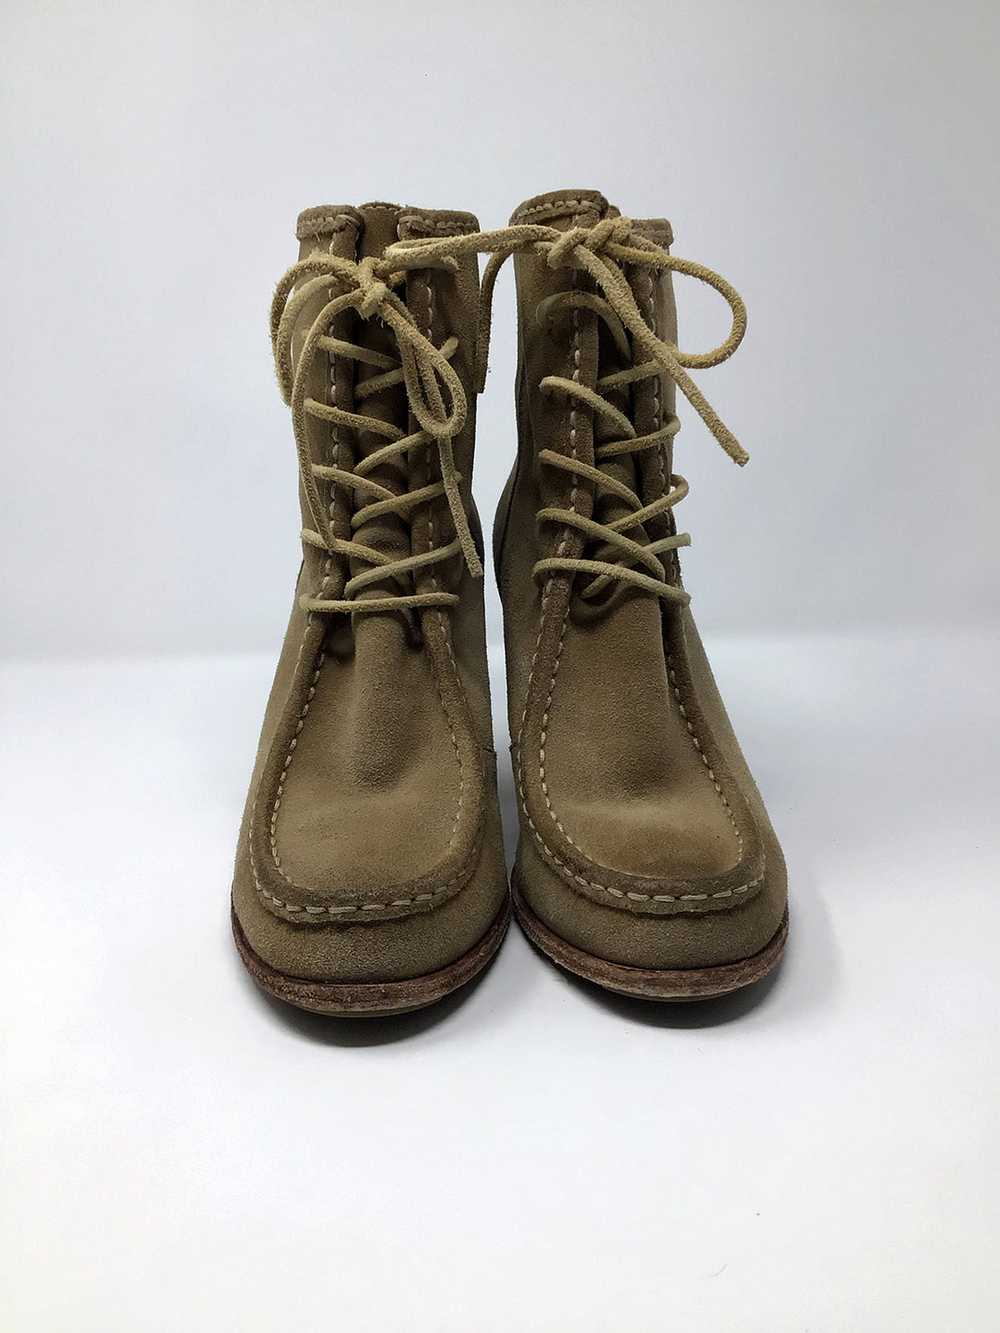 Frye Size 8.5 Light Brown Suede Ankle Boots - image 3